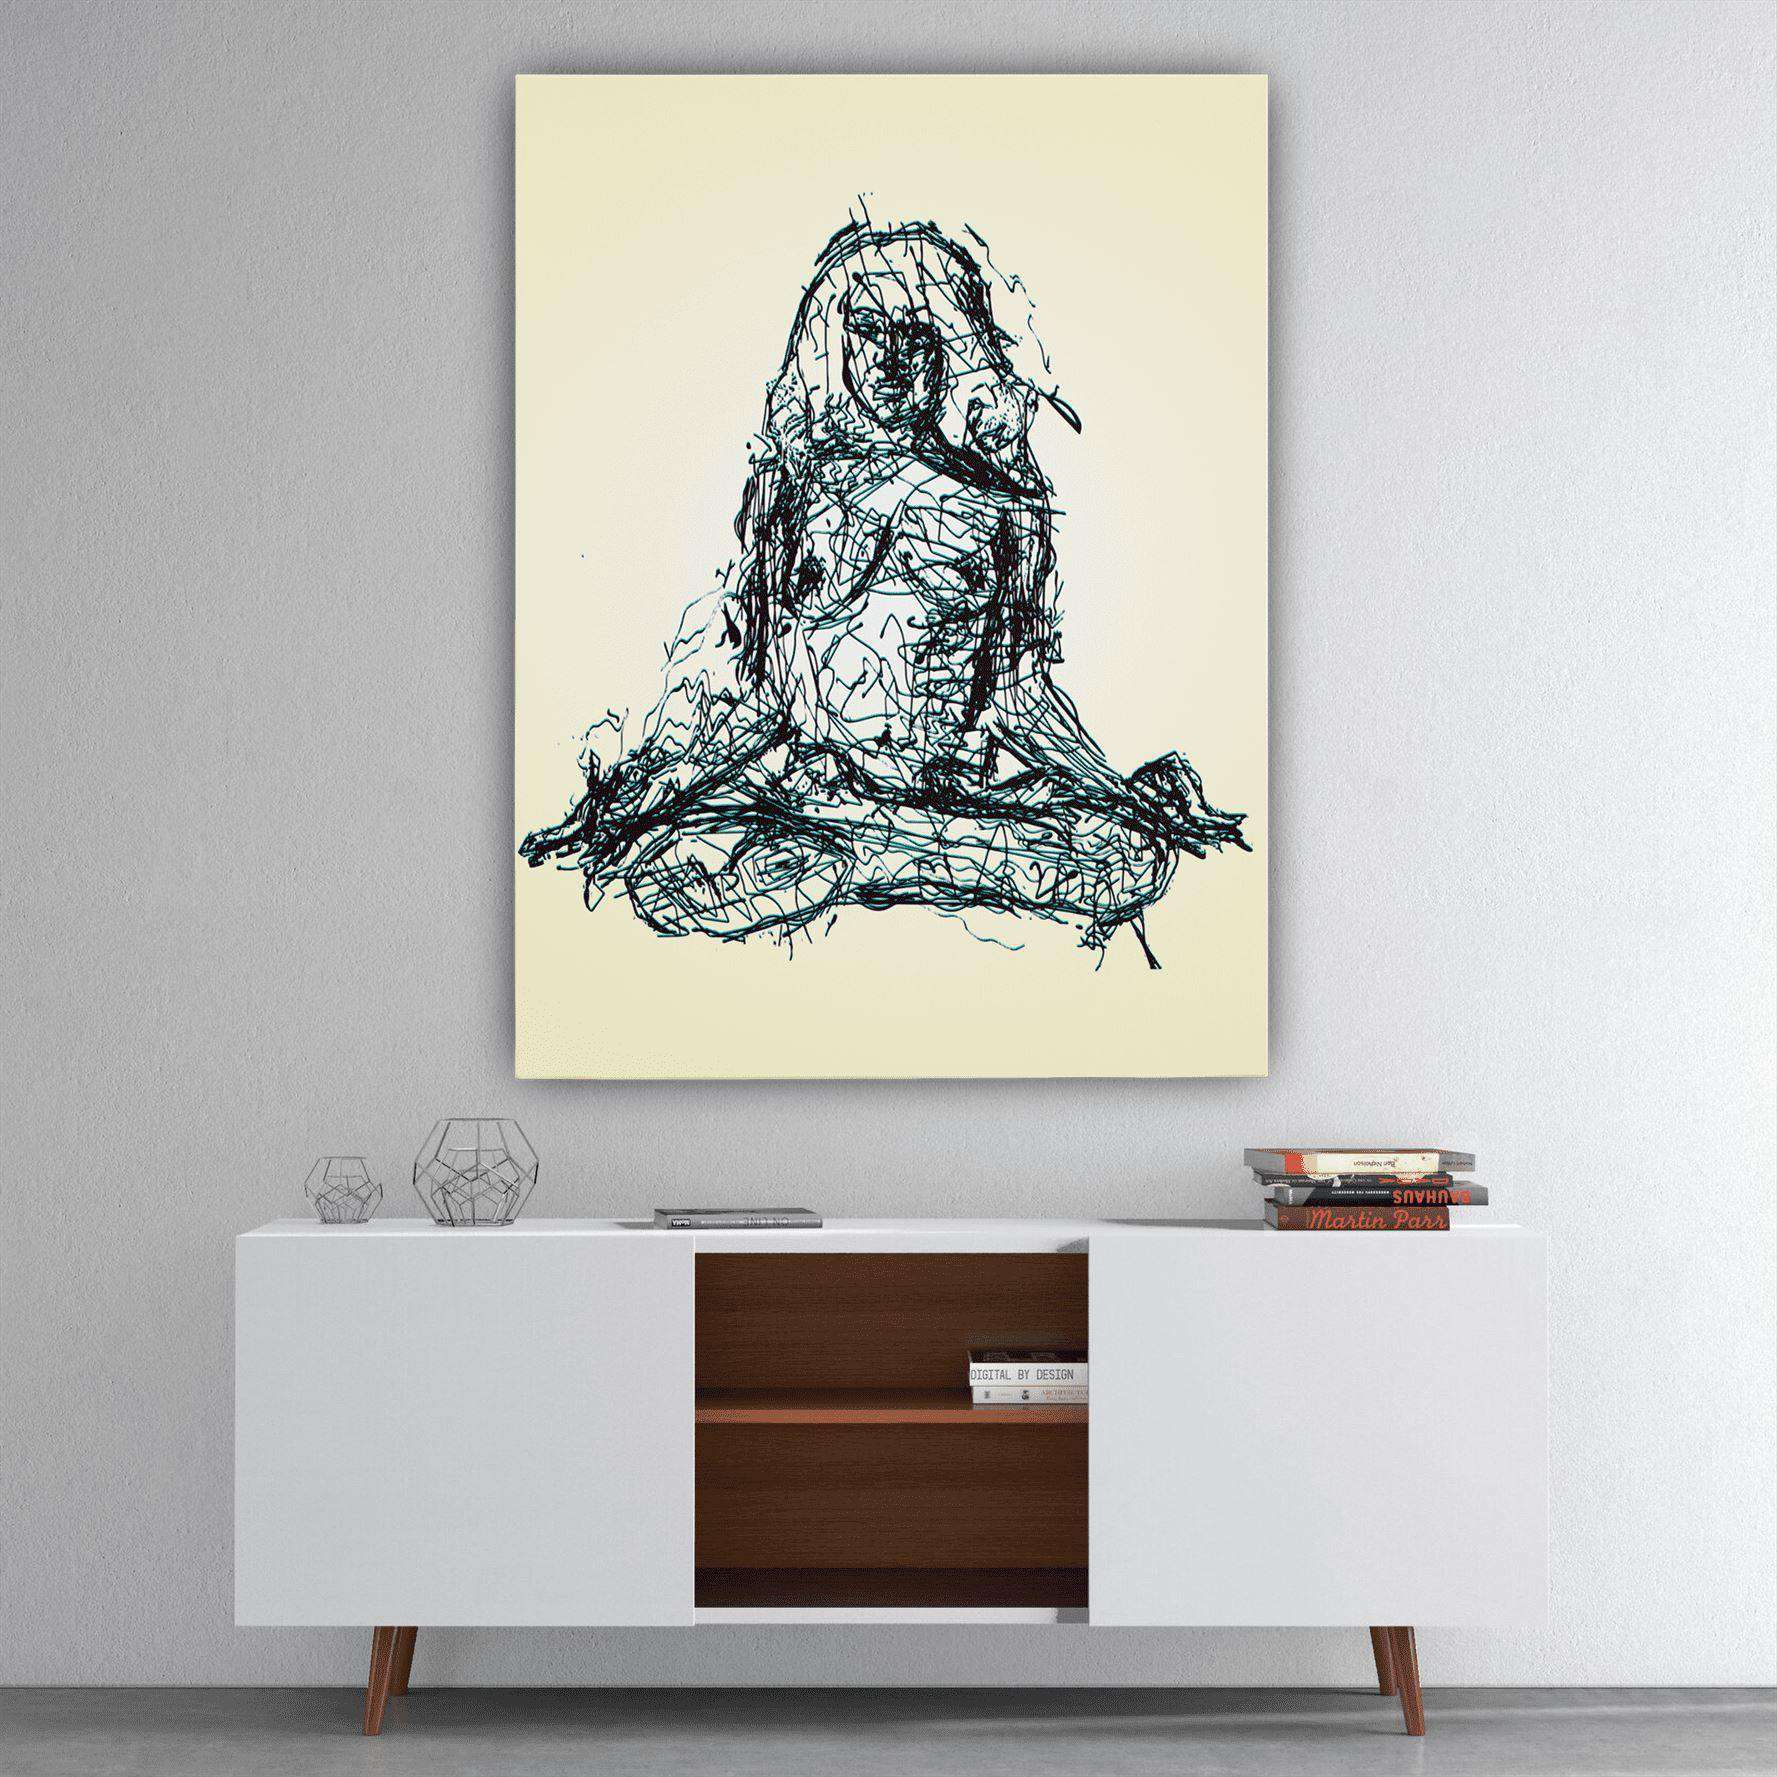 Meditation In The Nude Canvas Wido 